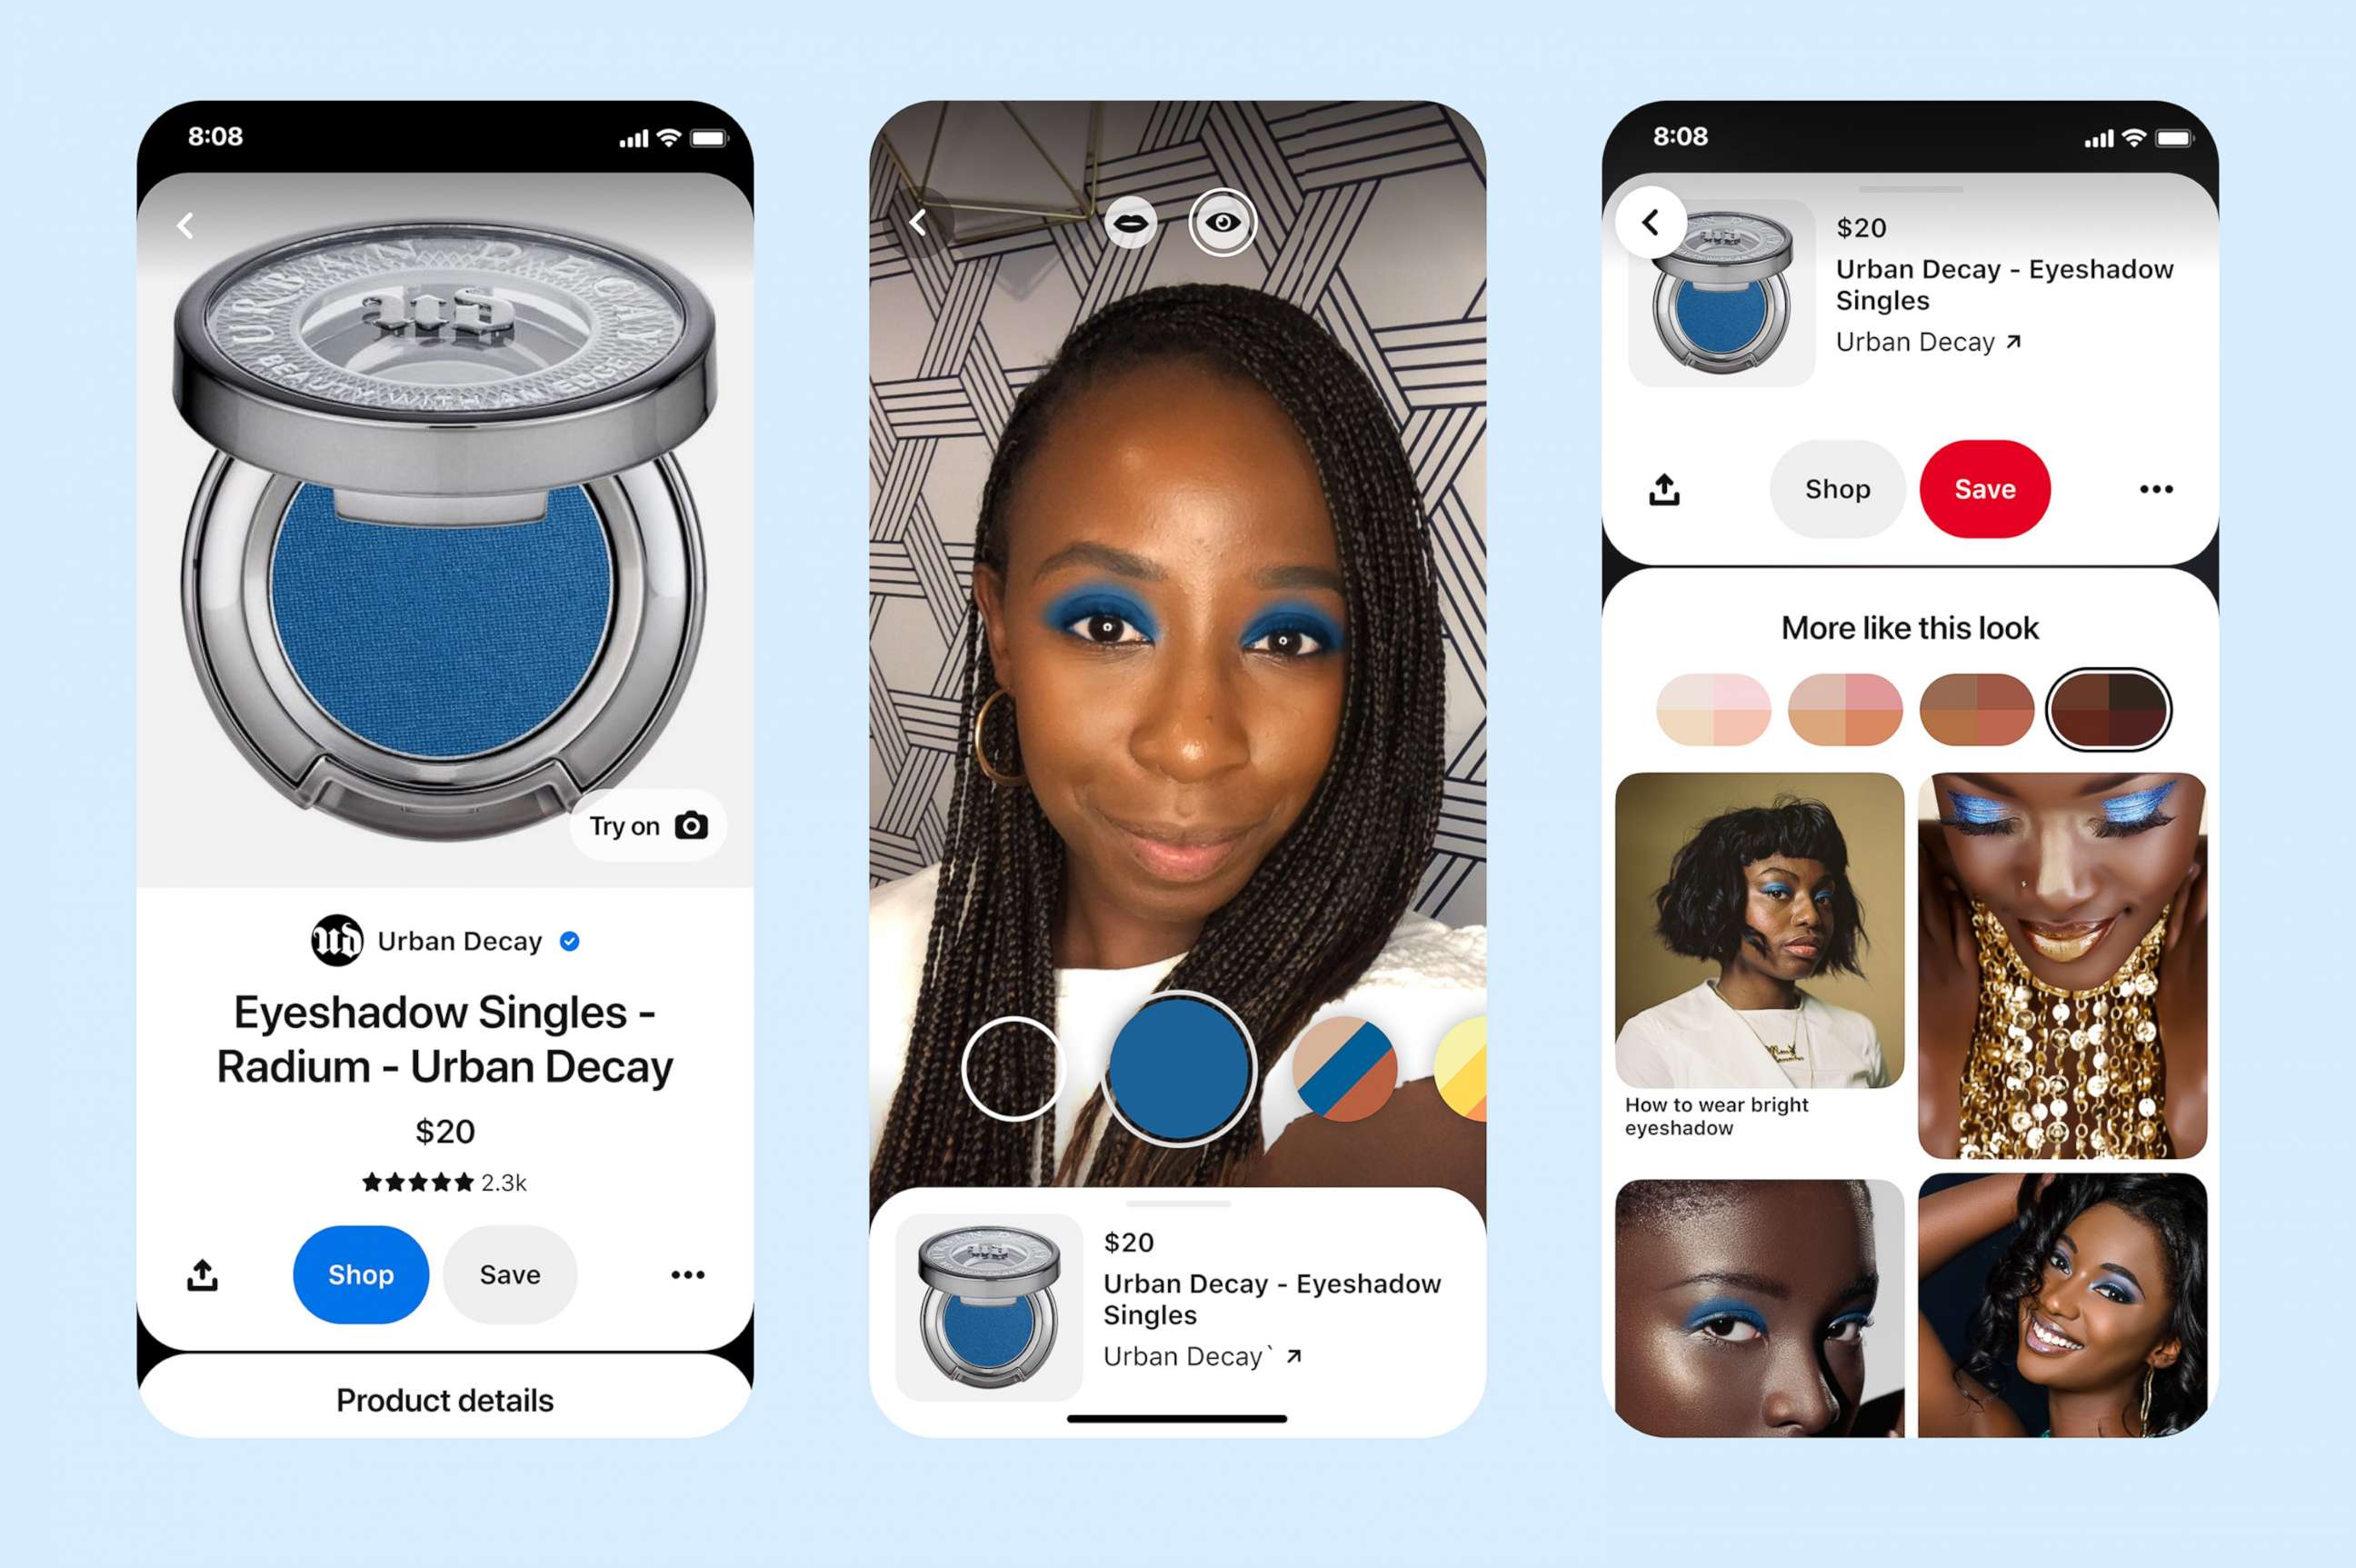 PHOTO: Pinterest has launched an AR eyeshadow try-on tool for its users.